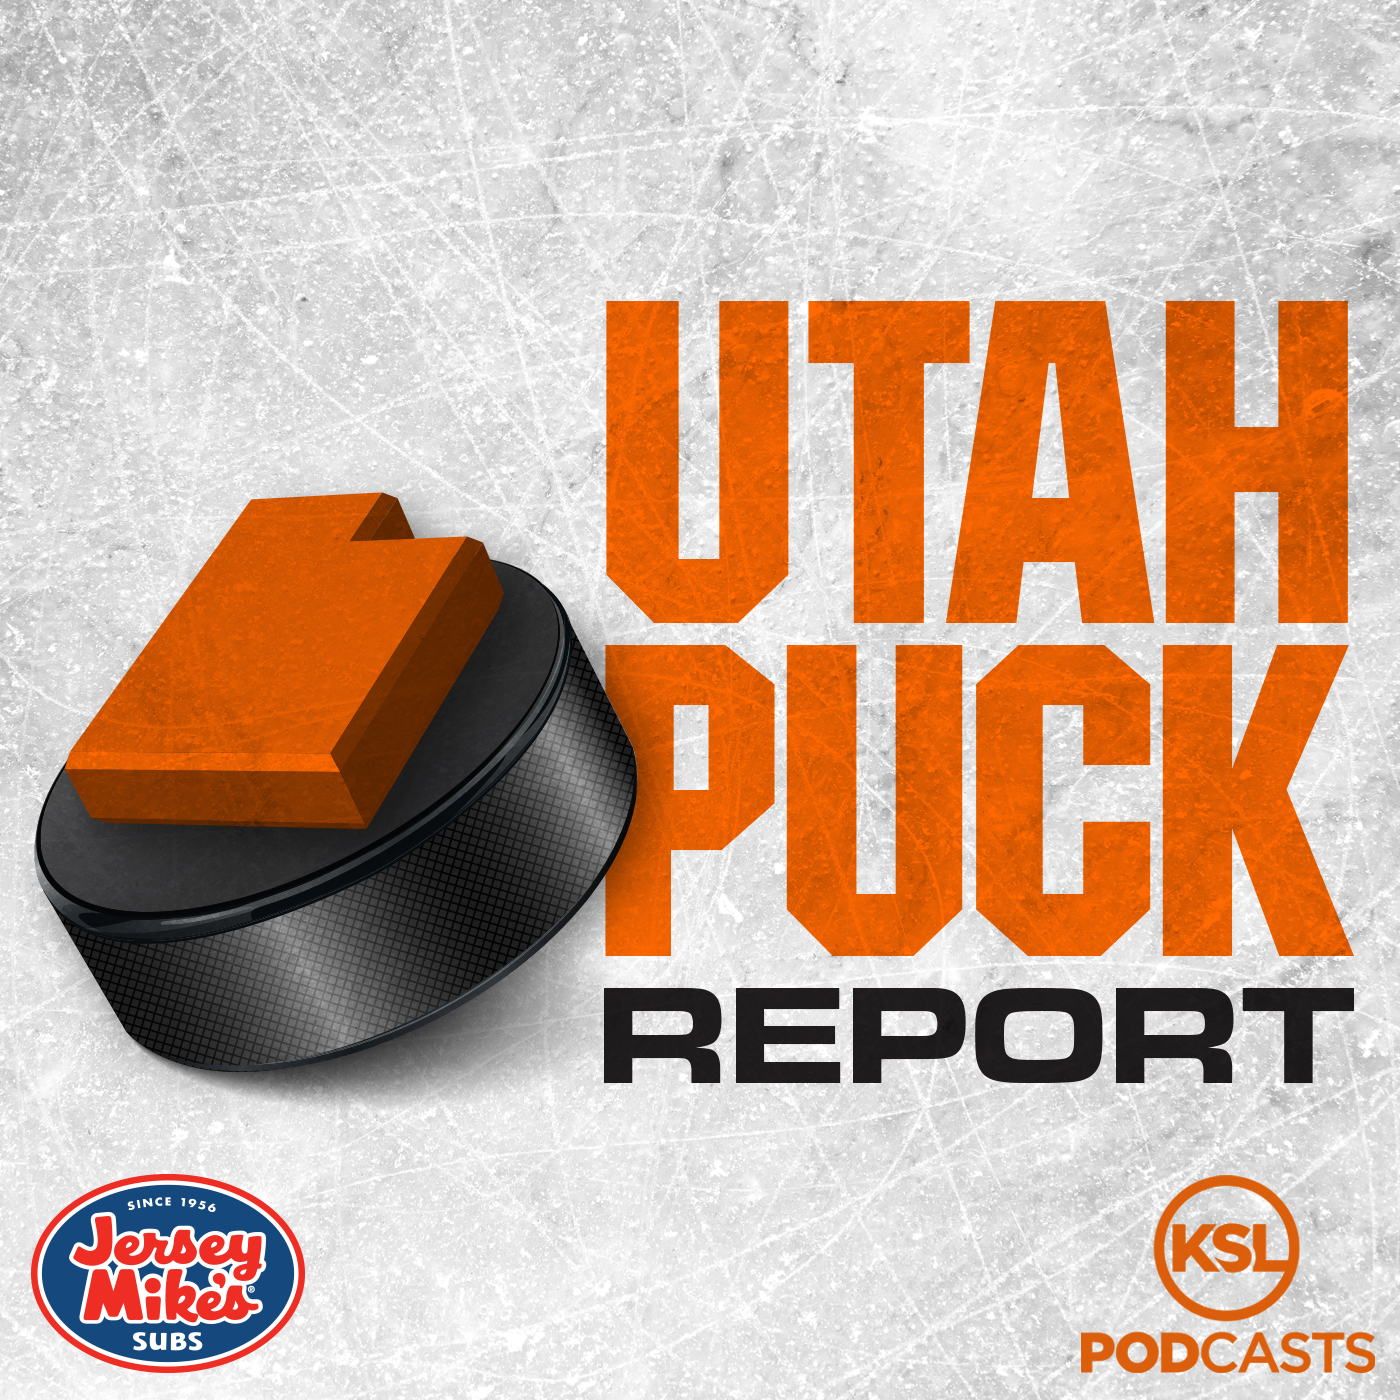 Making Utah hockey more competitive and beneficial with Jack Skille and Jordan Parise